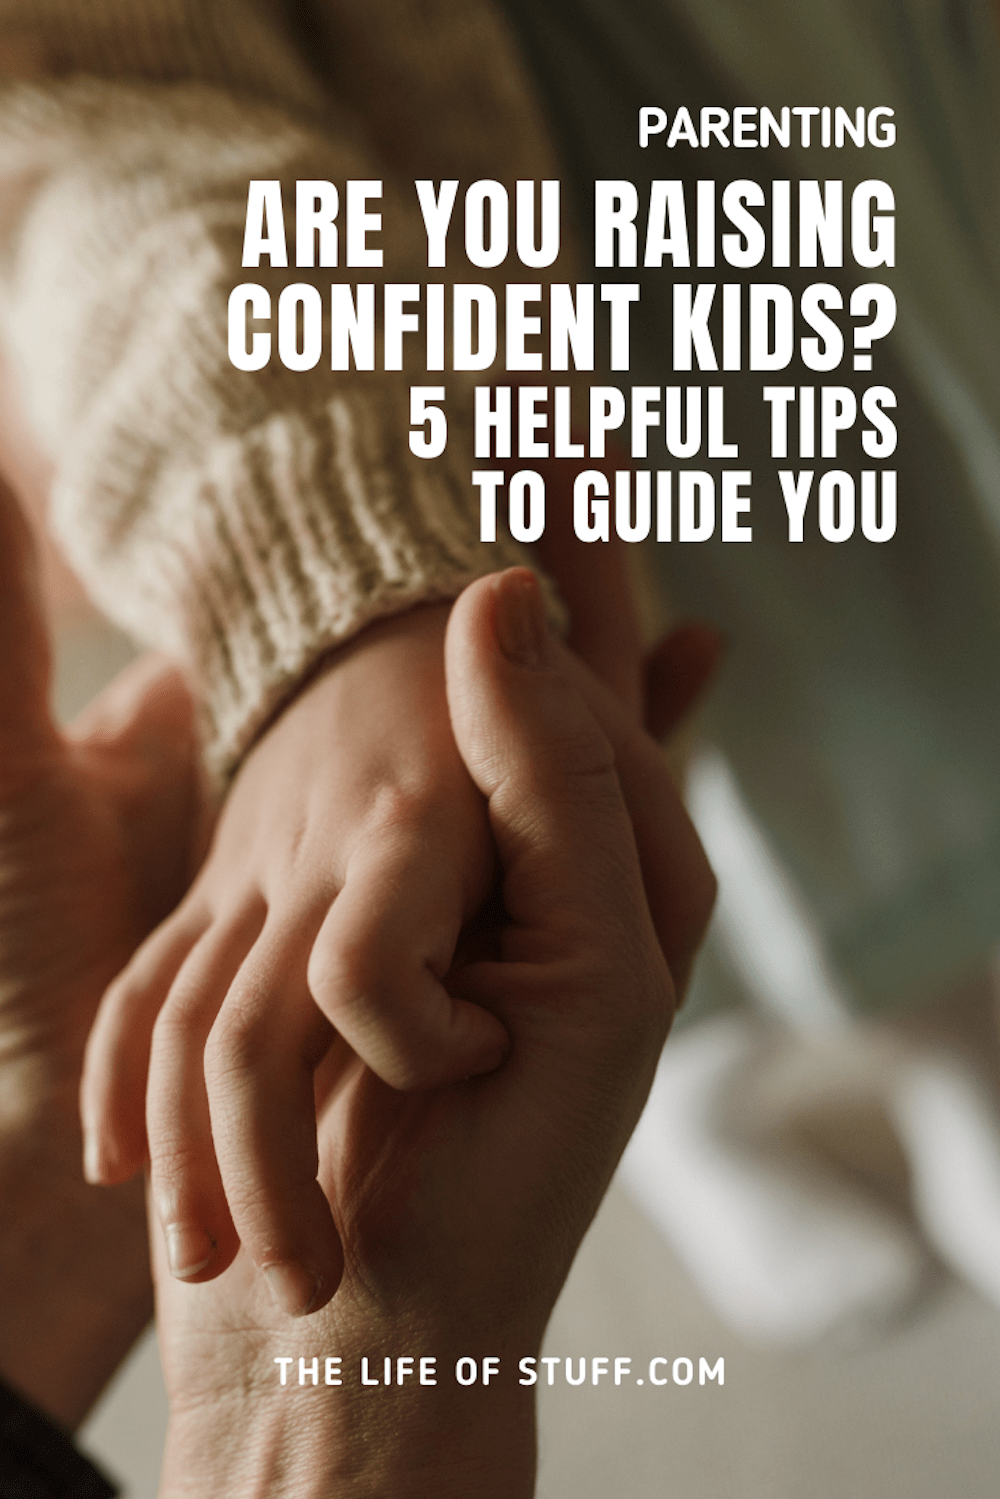 Are You Raising Confident Kids - 5 Helpful Tips to Guide You - The Life of Stuff